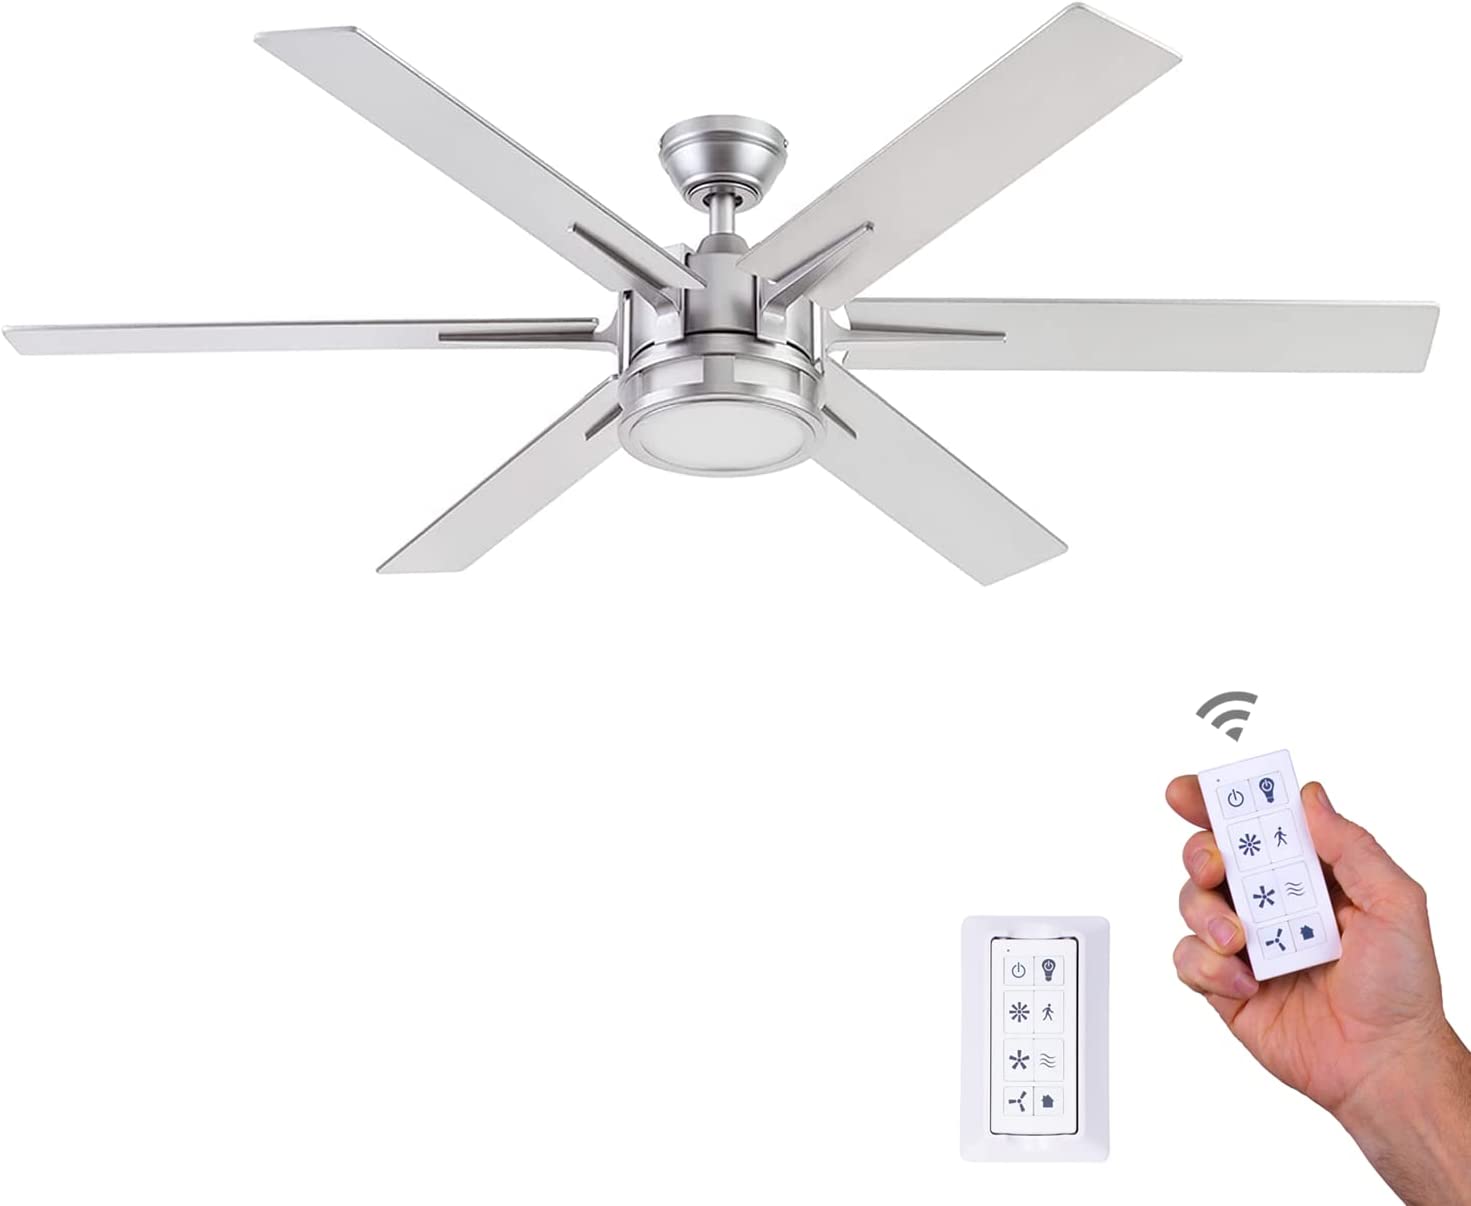 Honeywell 51626-01 Kaliza Contemporary LED Ceiling Fan For Bedroom, 56-Inch